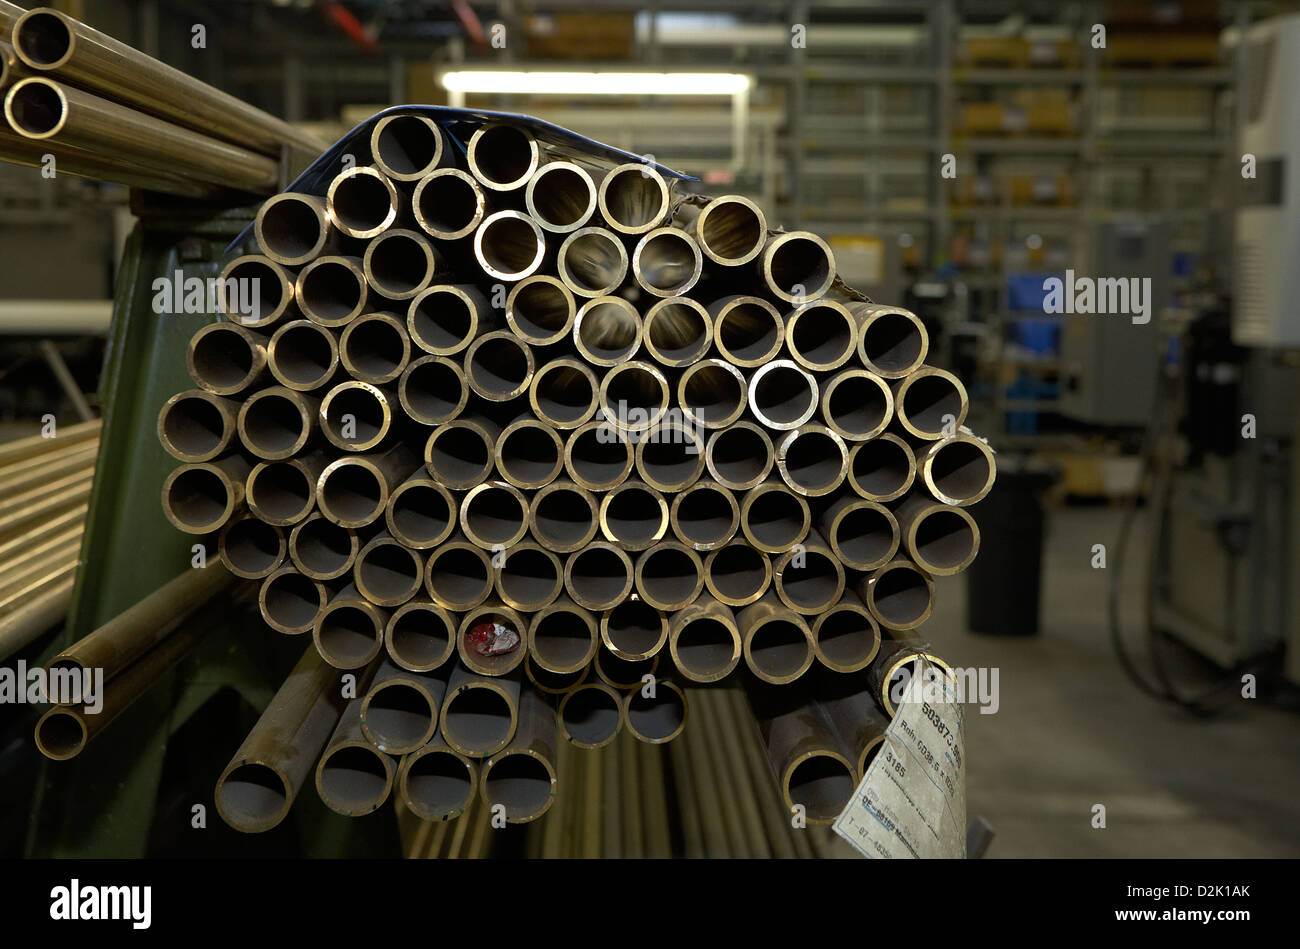 https://c8.alamy.com/comp/D2K1AK/berlin-germany-brass-tubes-are-stacked-in-a-storage-material-D2K1AK.jpg